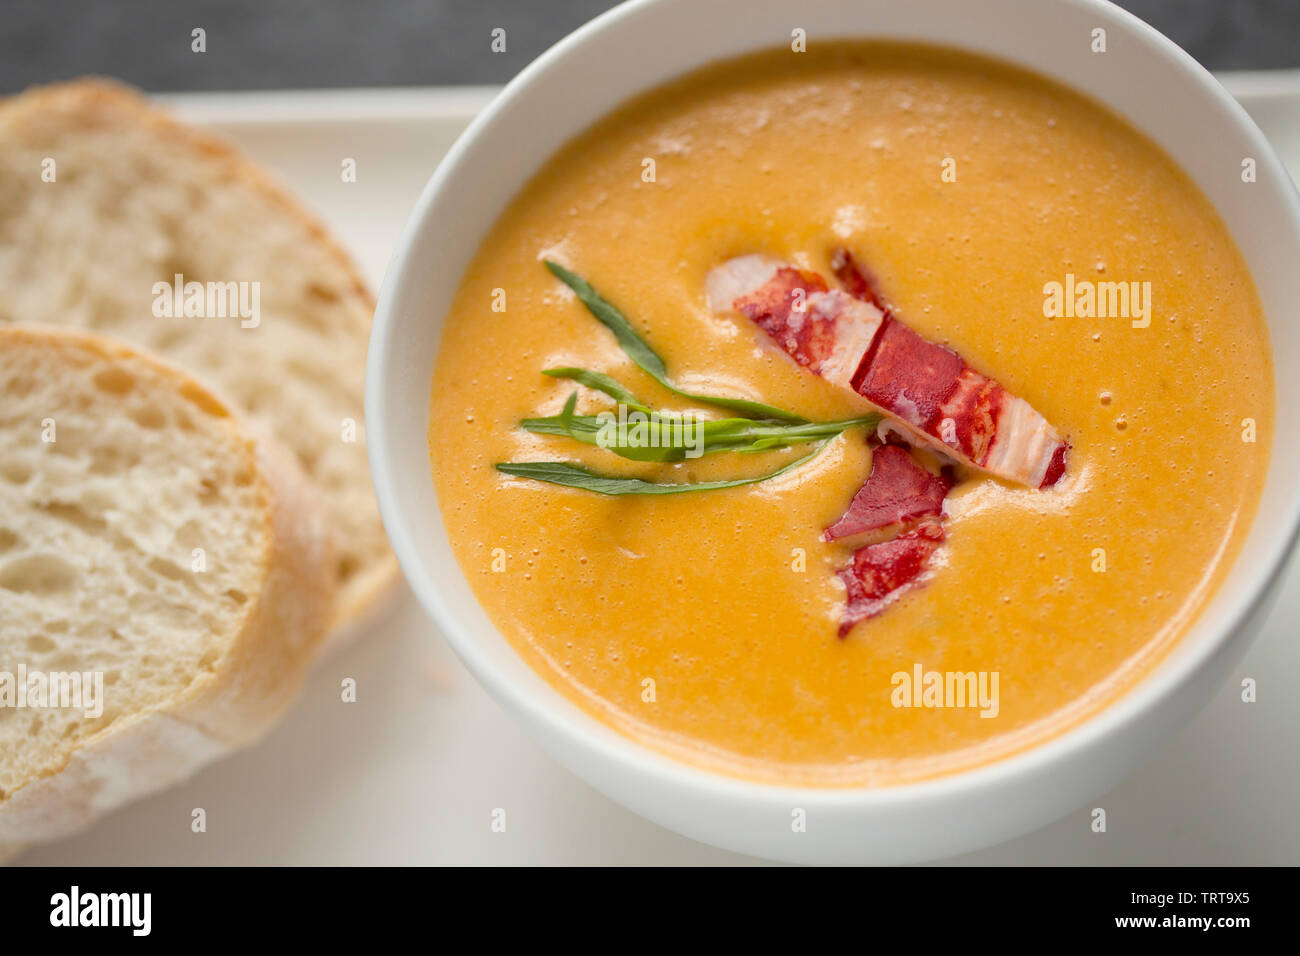 A bowl of the famous dish of lobster bisque, a soup with French origins made from the shells and meat of a lobster and includes various vegetables, he Stock Photo